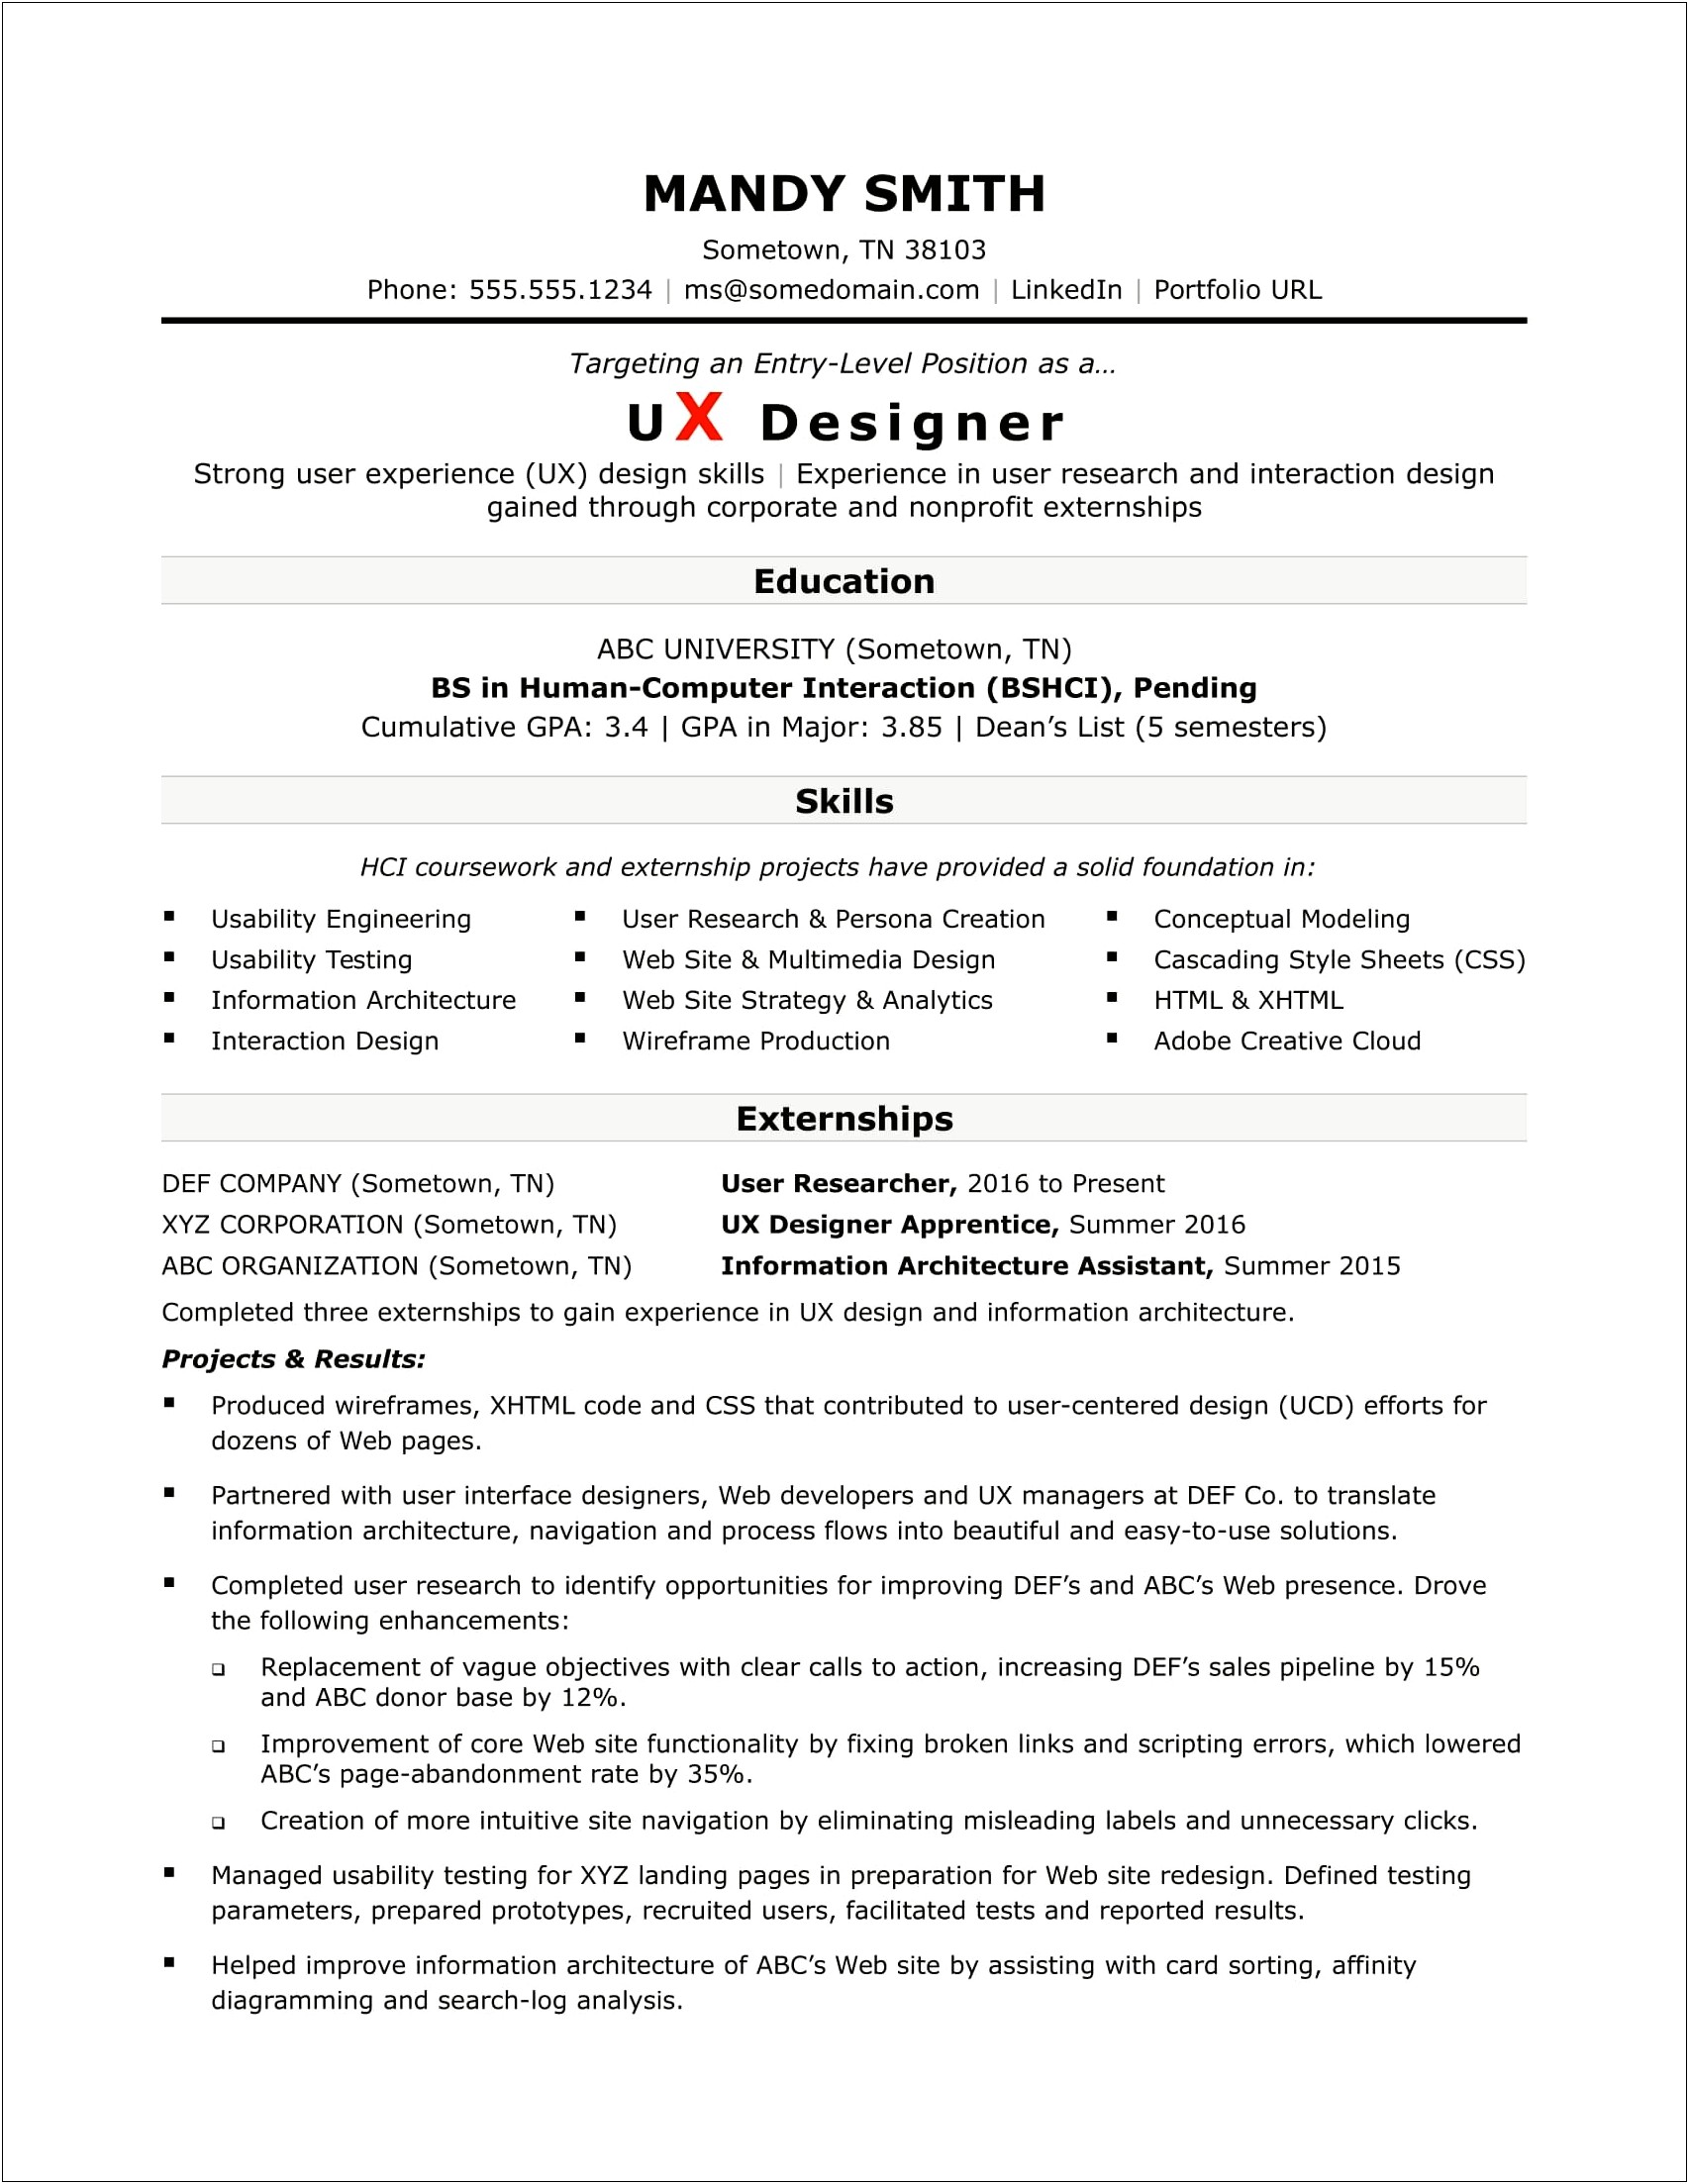 Resume Samples For People Without Much Expreience